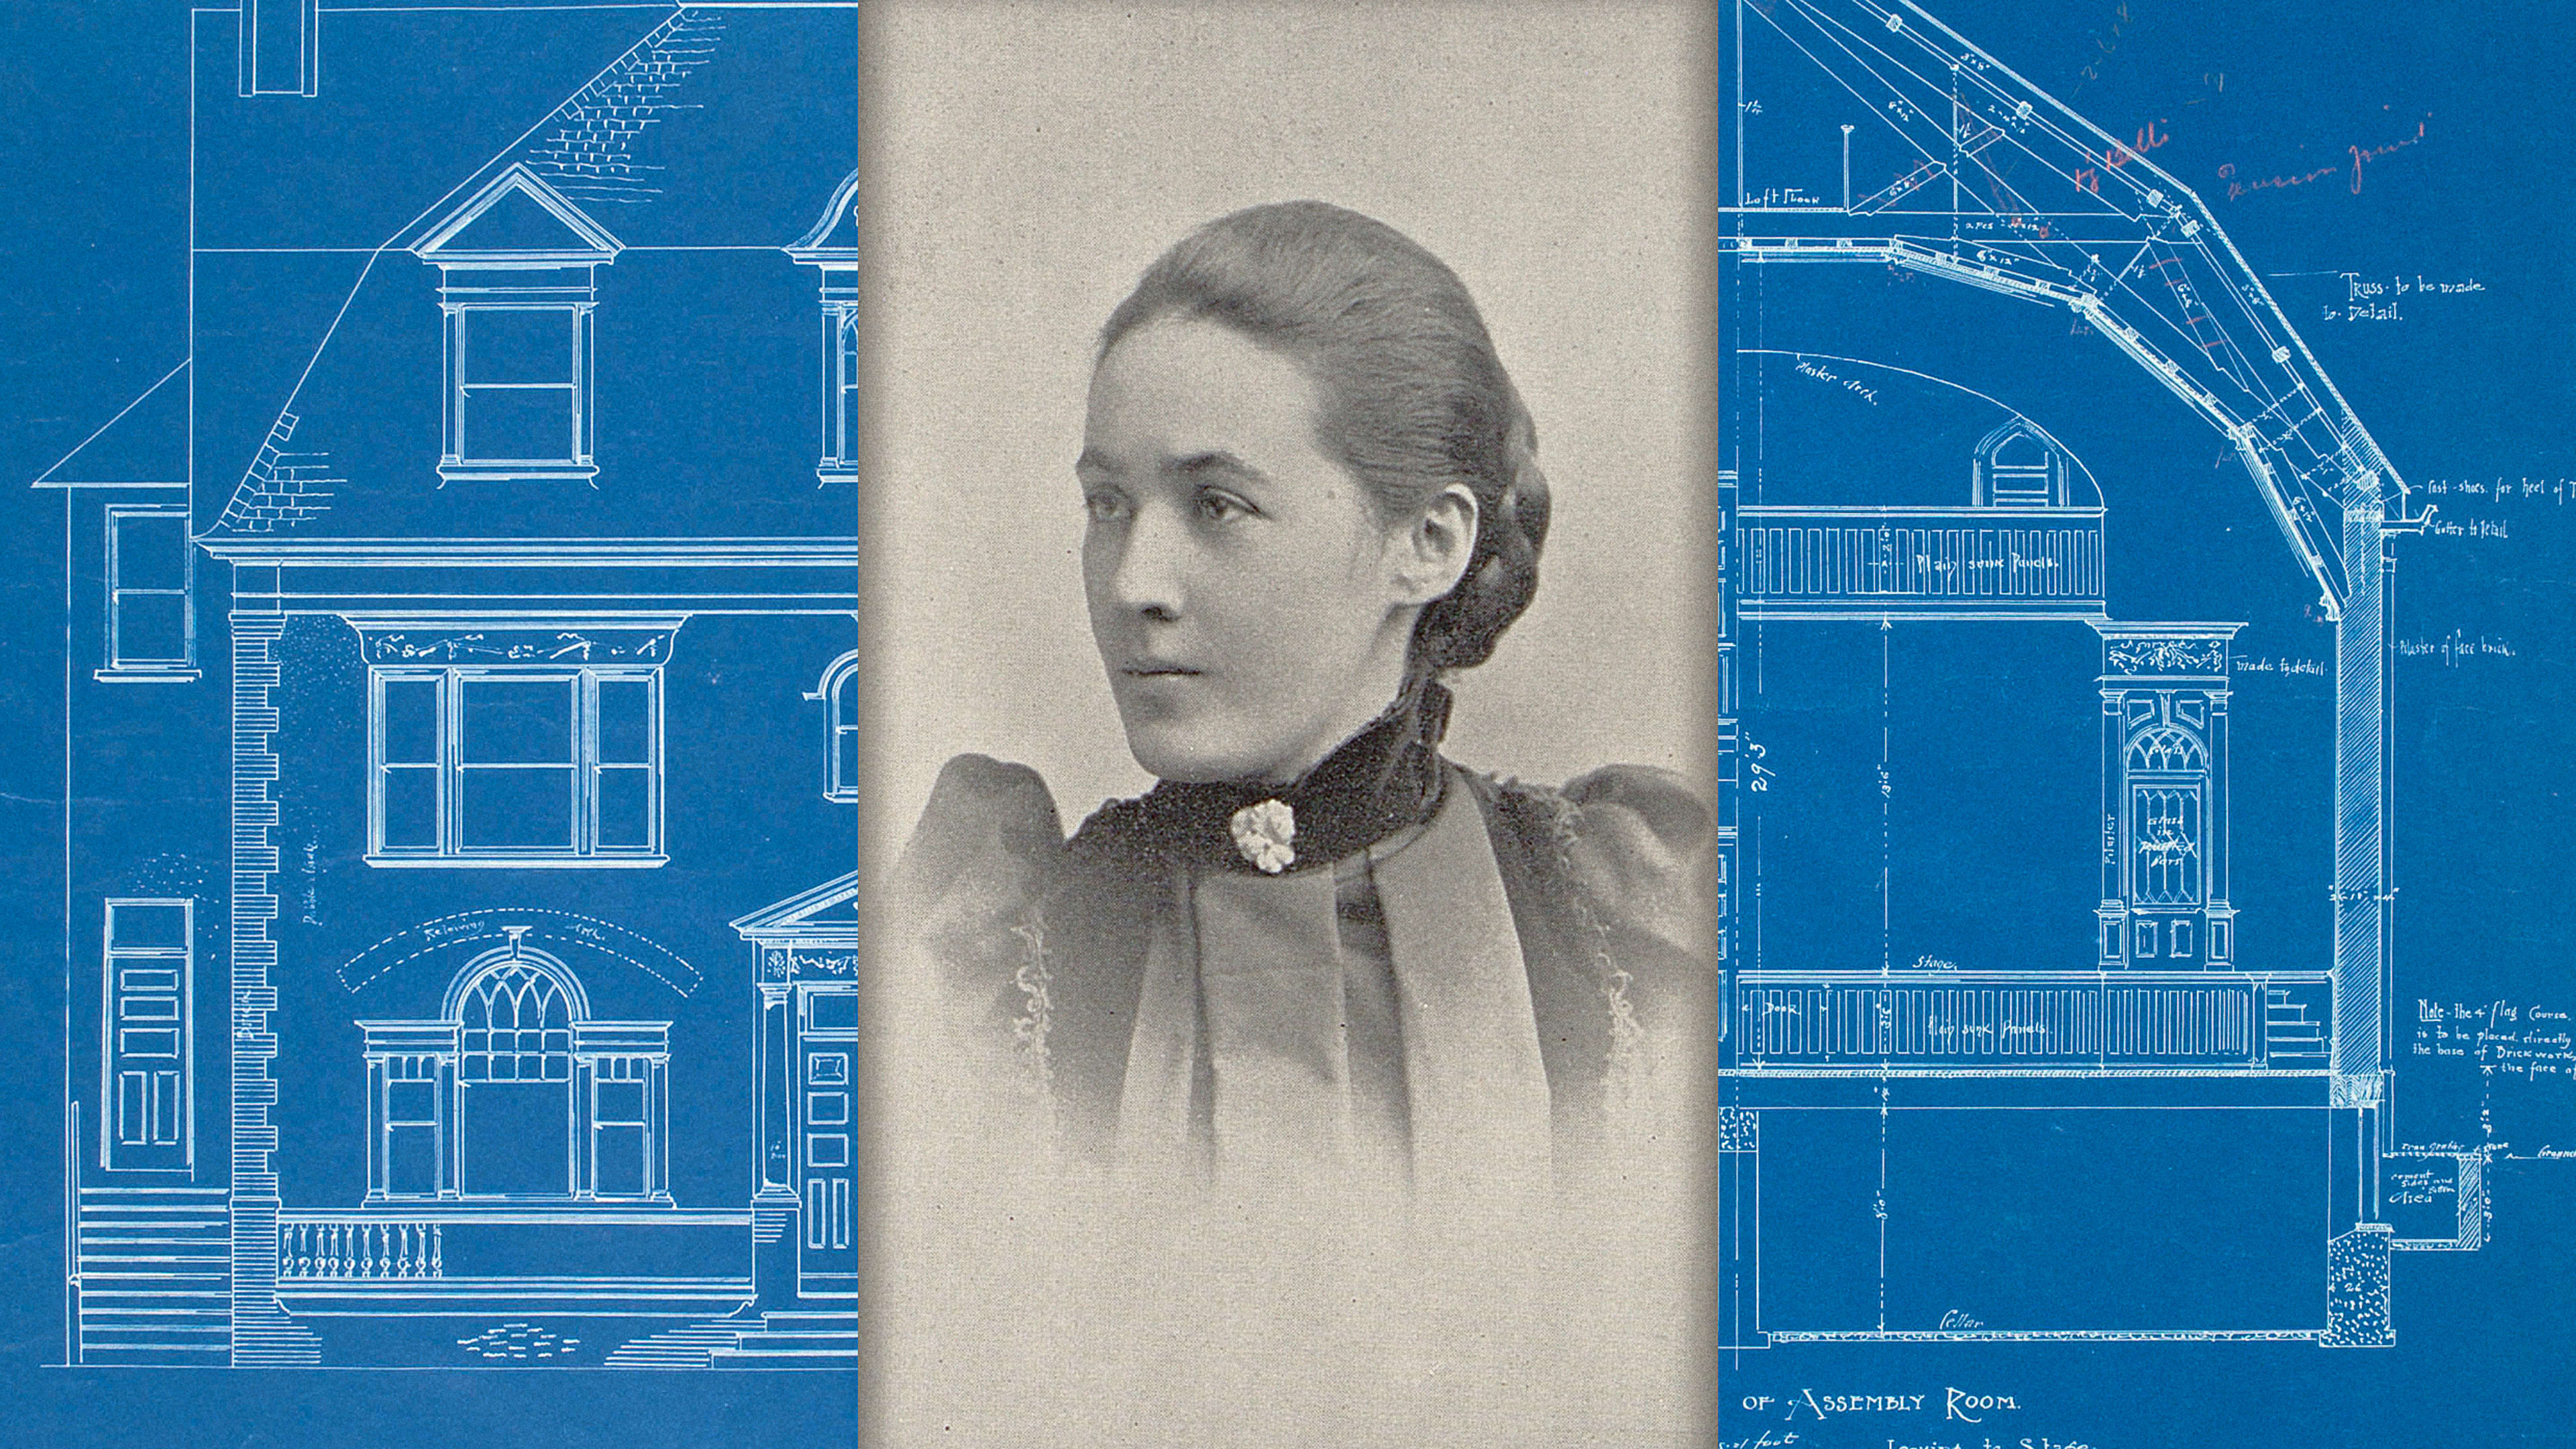 The forgotten story of America’s first independent female architect